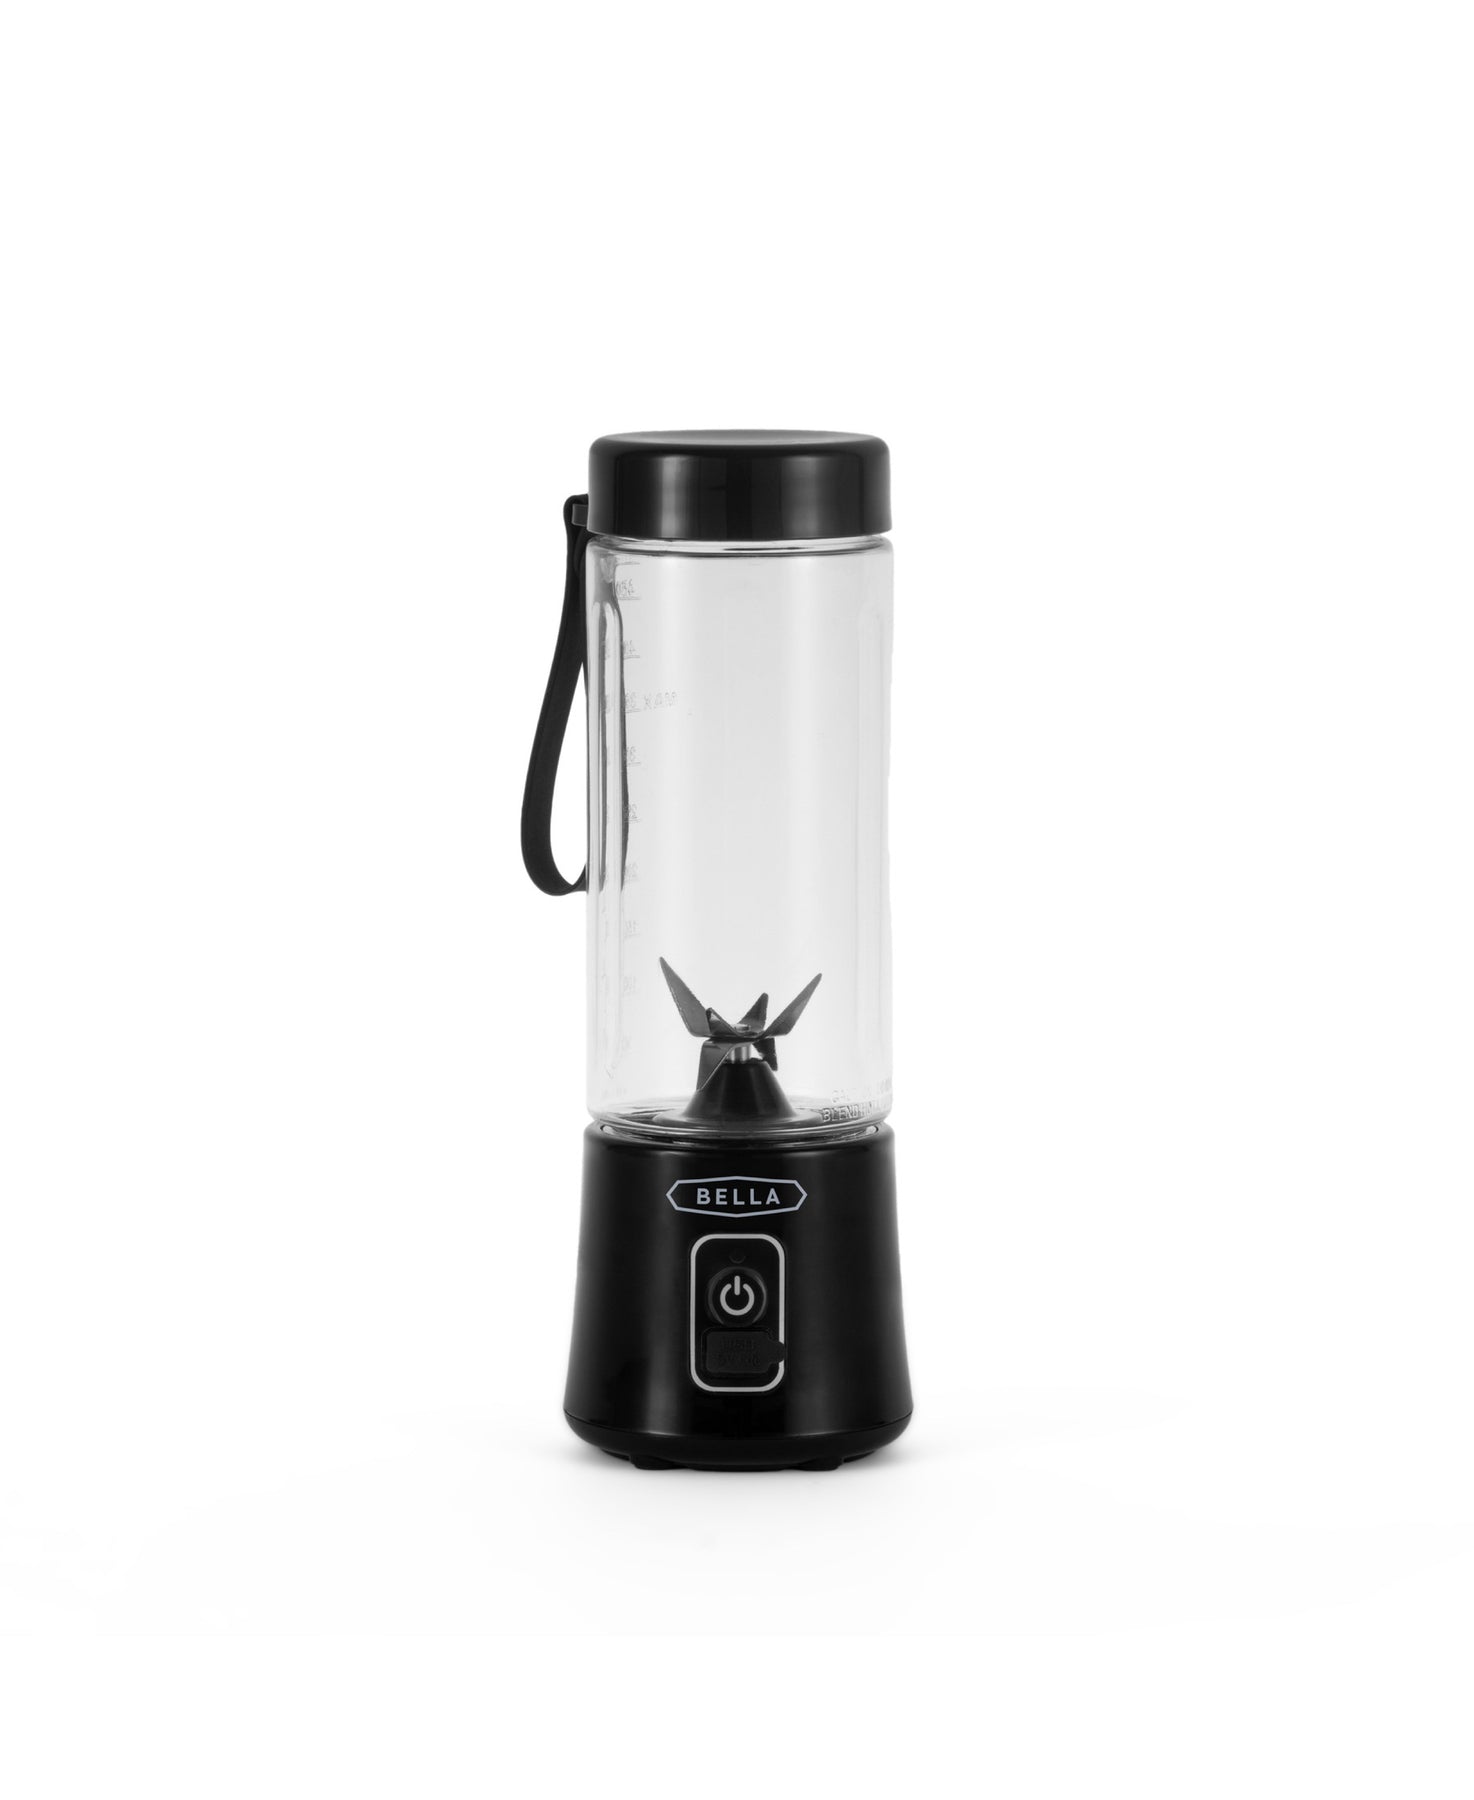 Portable Blender Mini Blender With 6 Blades Usb Rechargeable - Temu